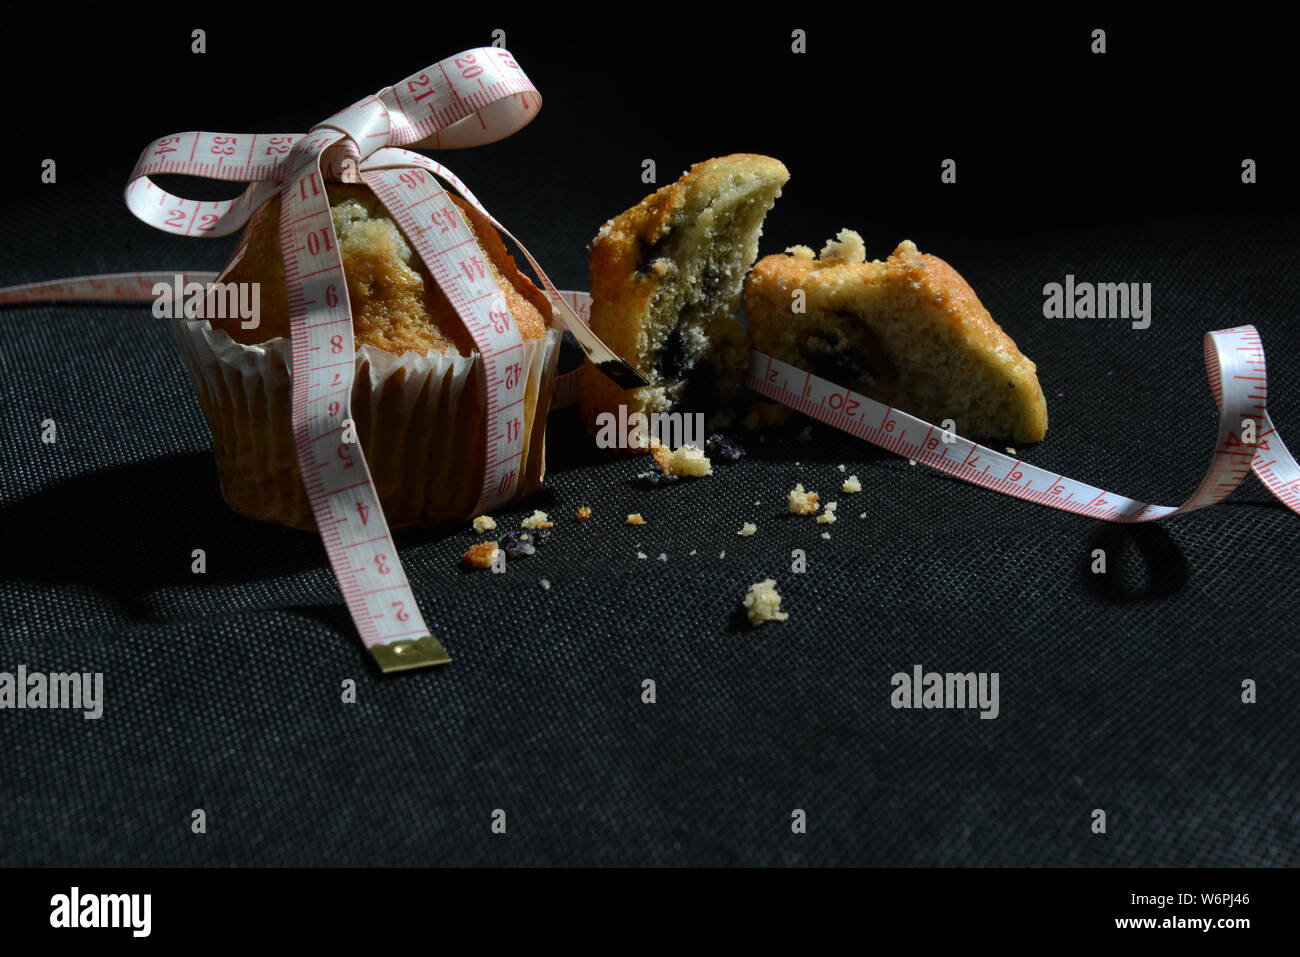 cup cake and cakes and loosing weight biscuit getting fat and sizing symbol of  weight meter cake from close meaningful photo junk food Stock Photo